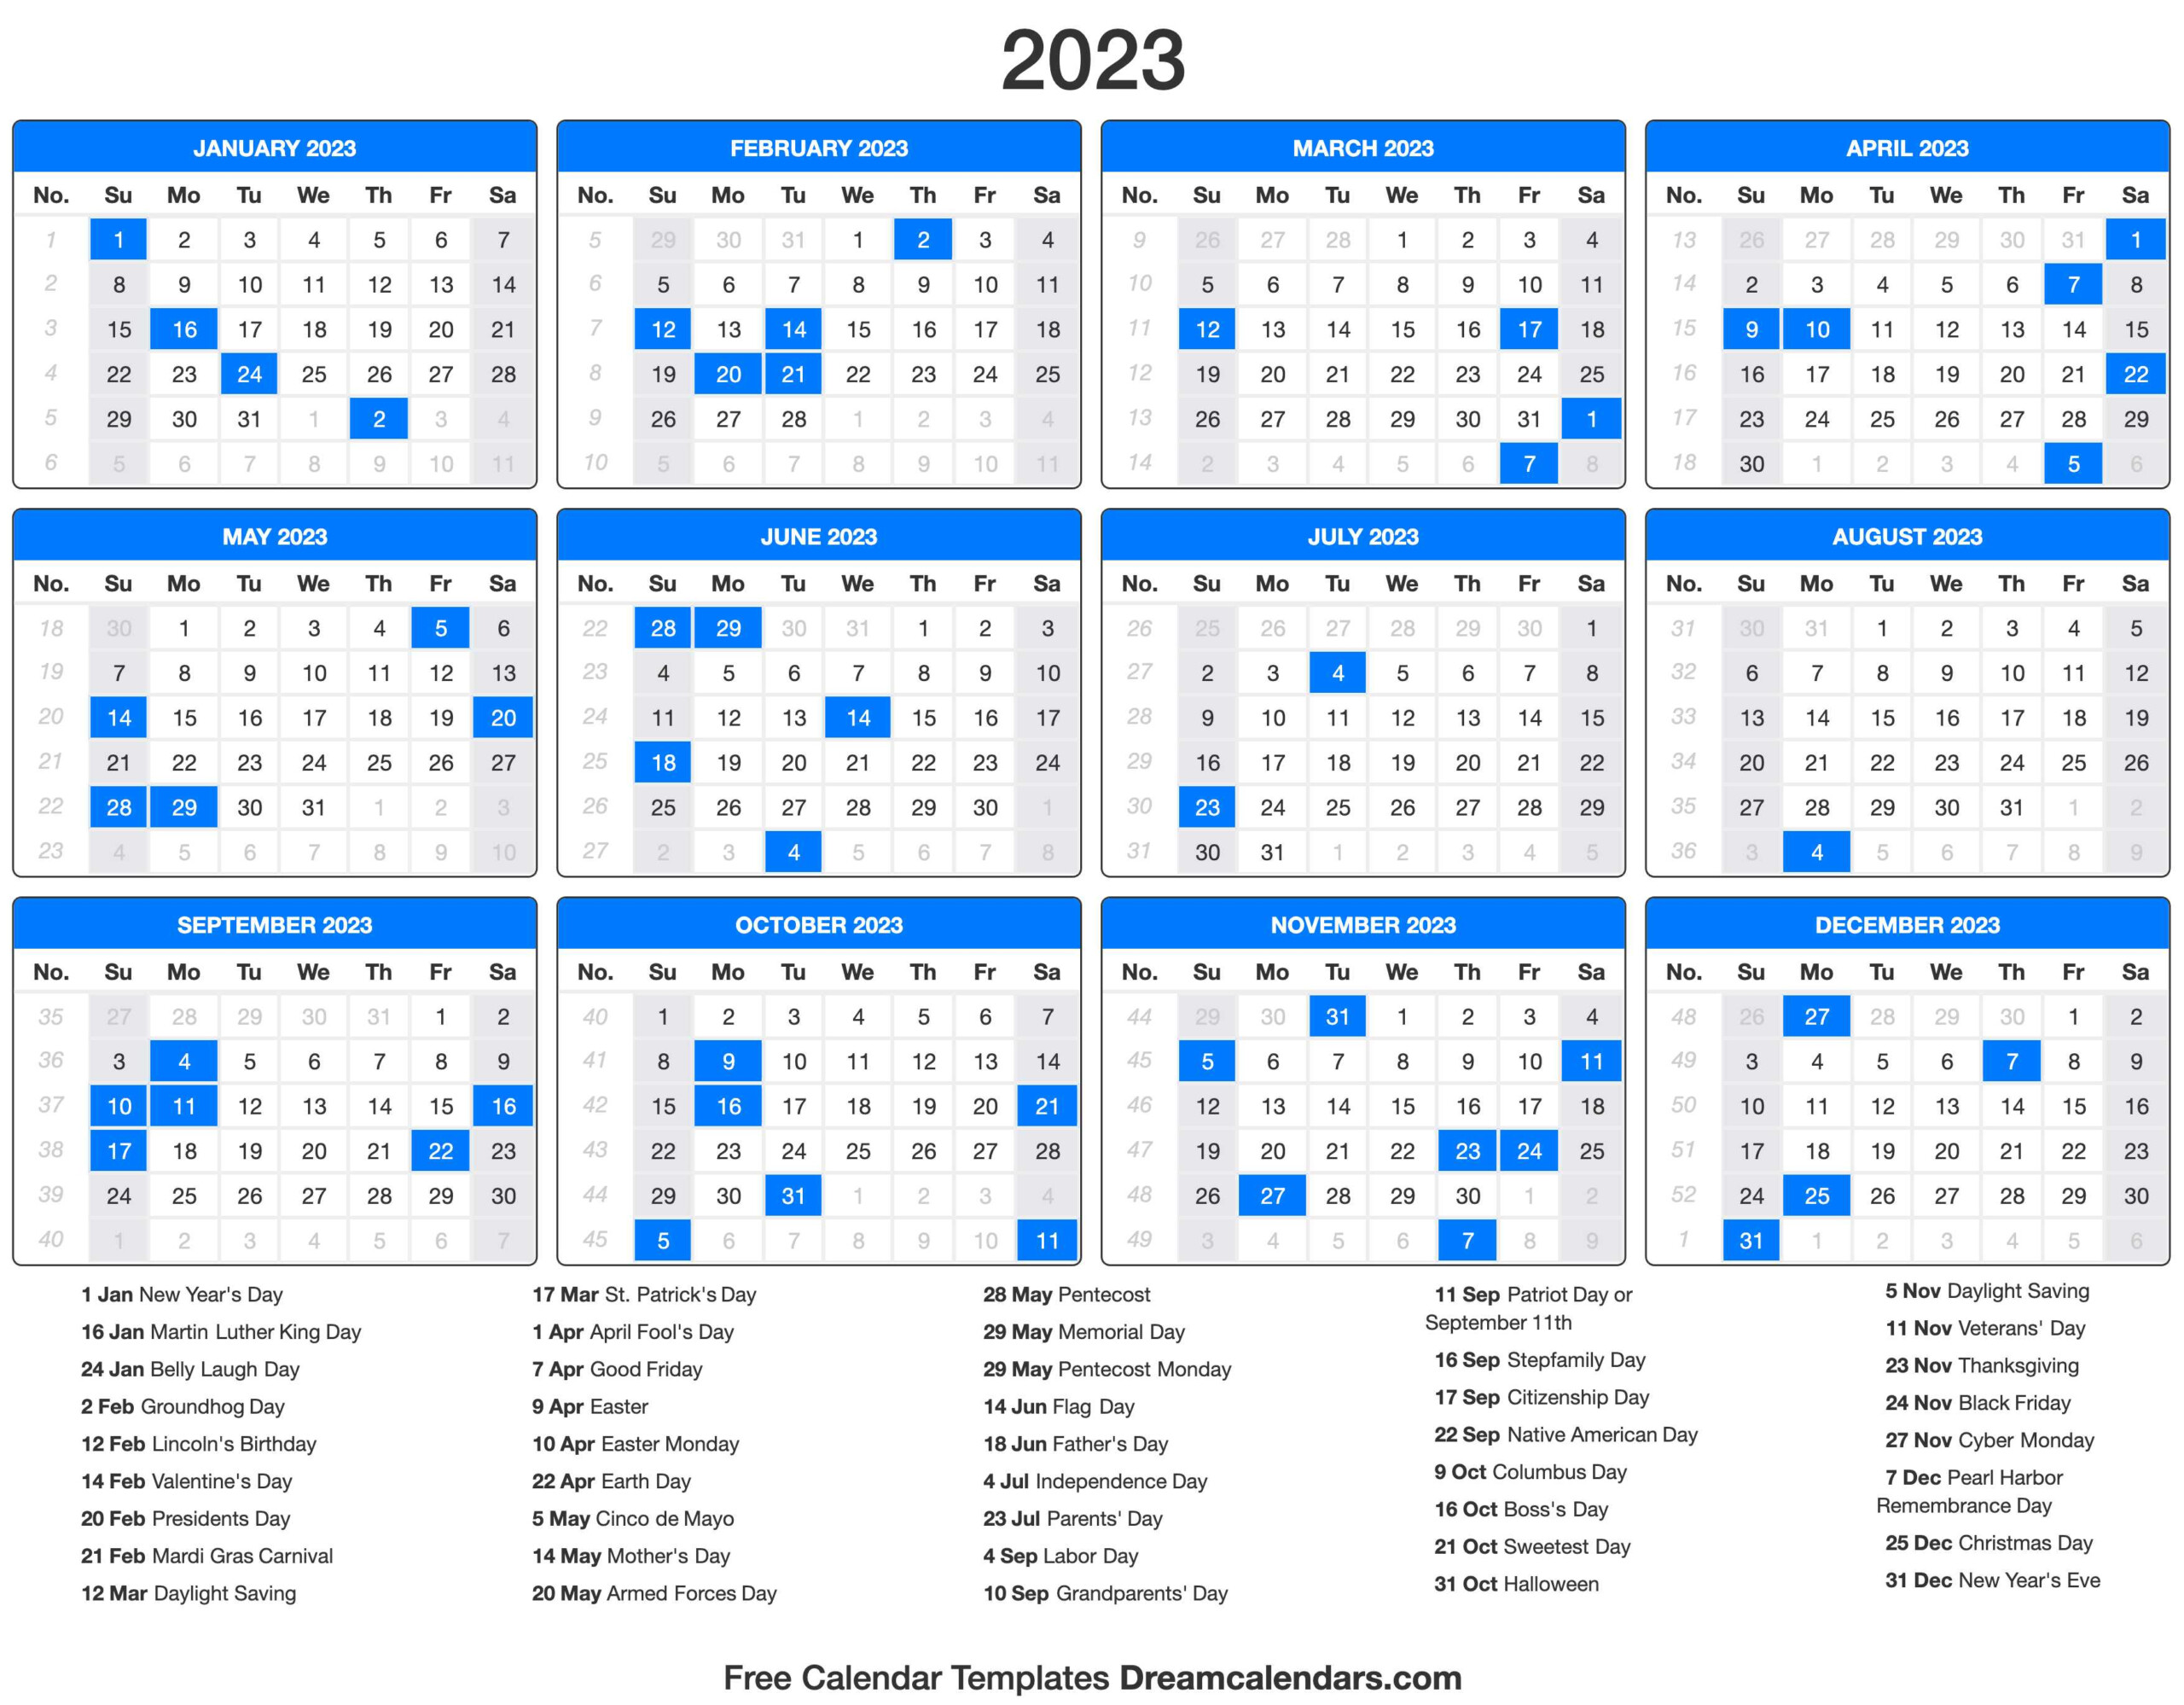 Holiday Dates For 2023 Get Latest News 2023 Update